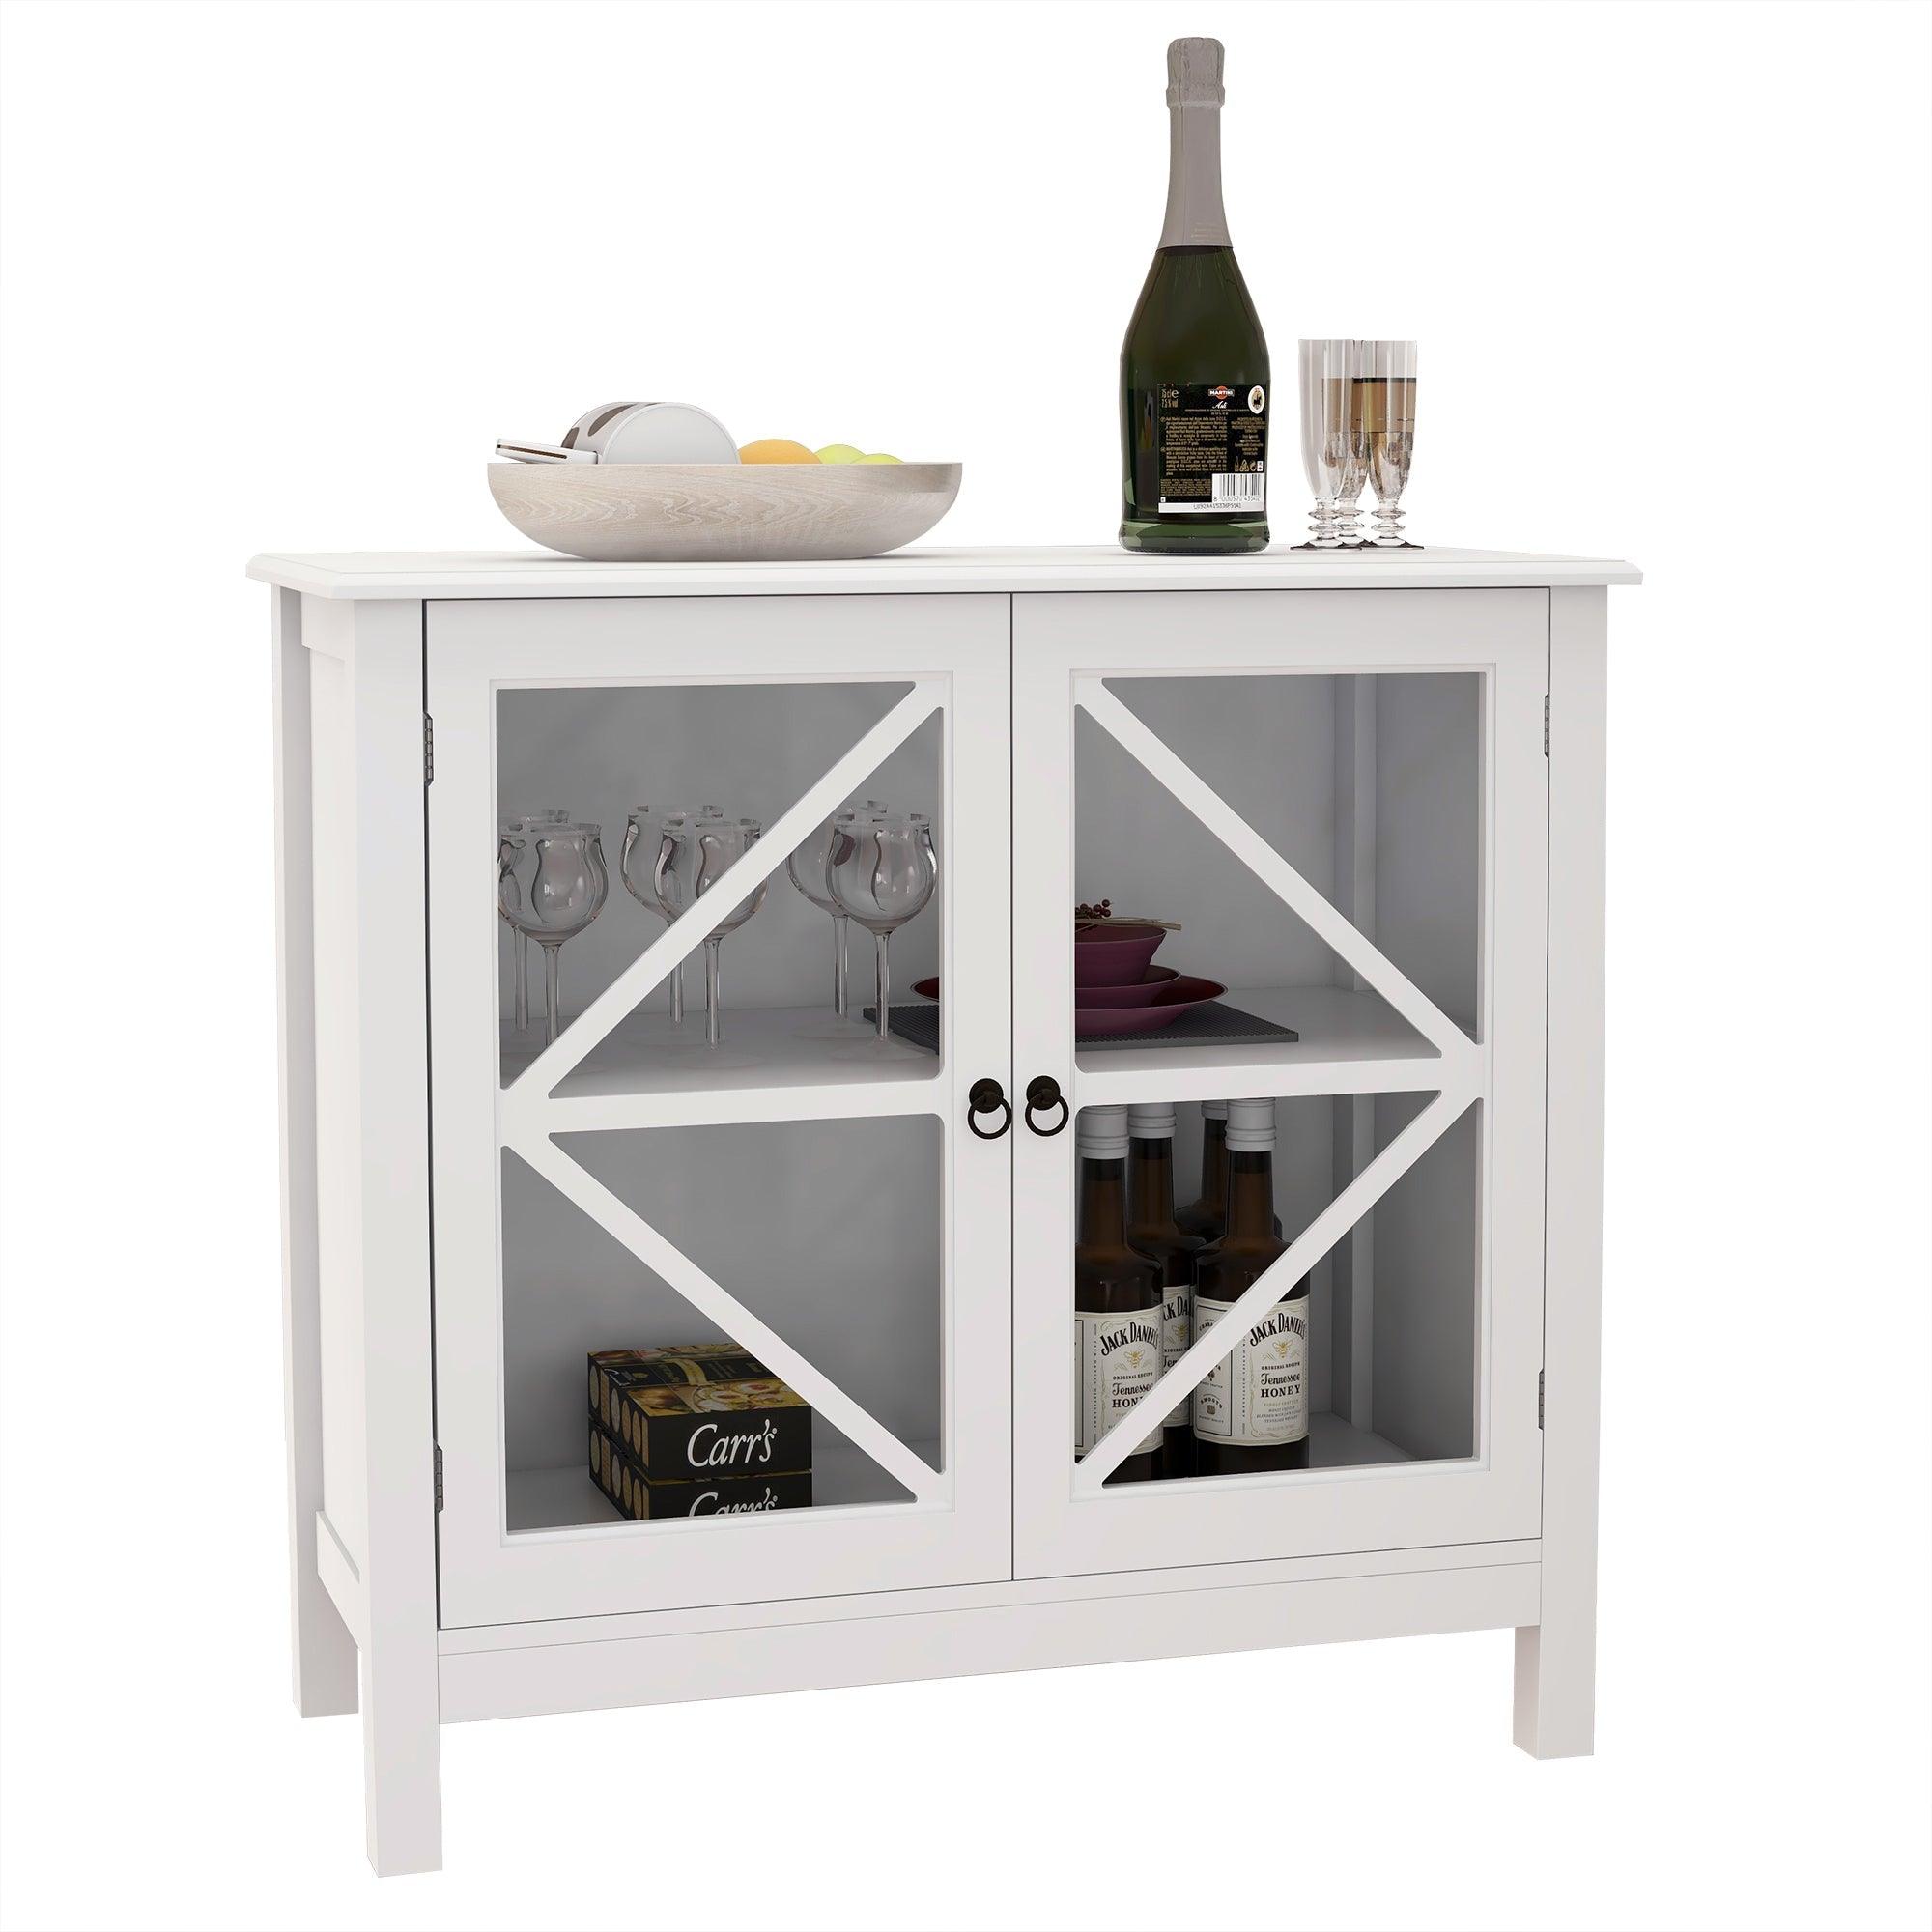 DEPLENO Kitchen Sideboard Buffet Cabinet with Double Glass Doors LamCham